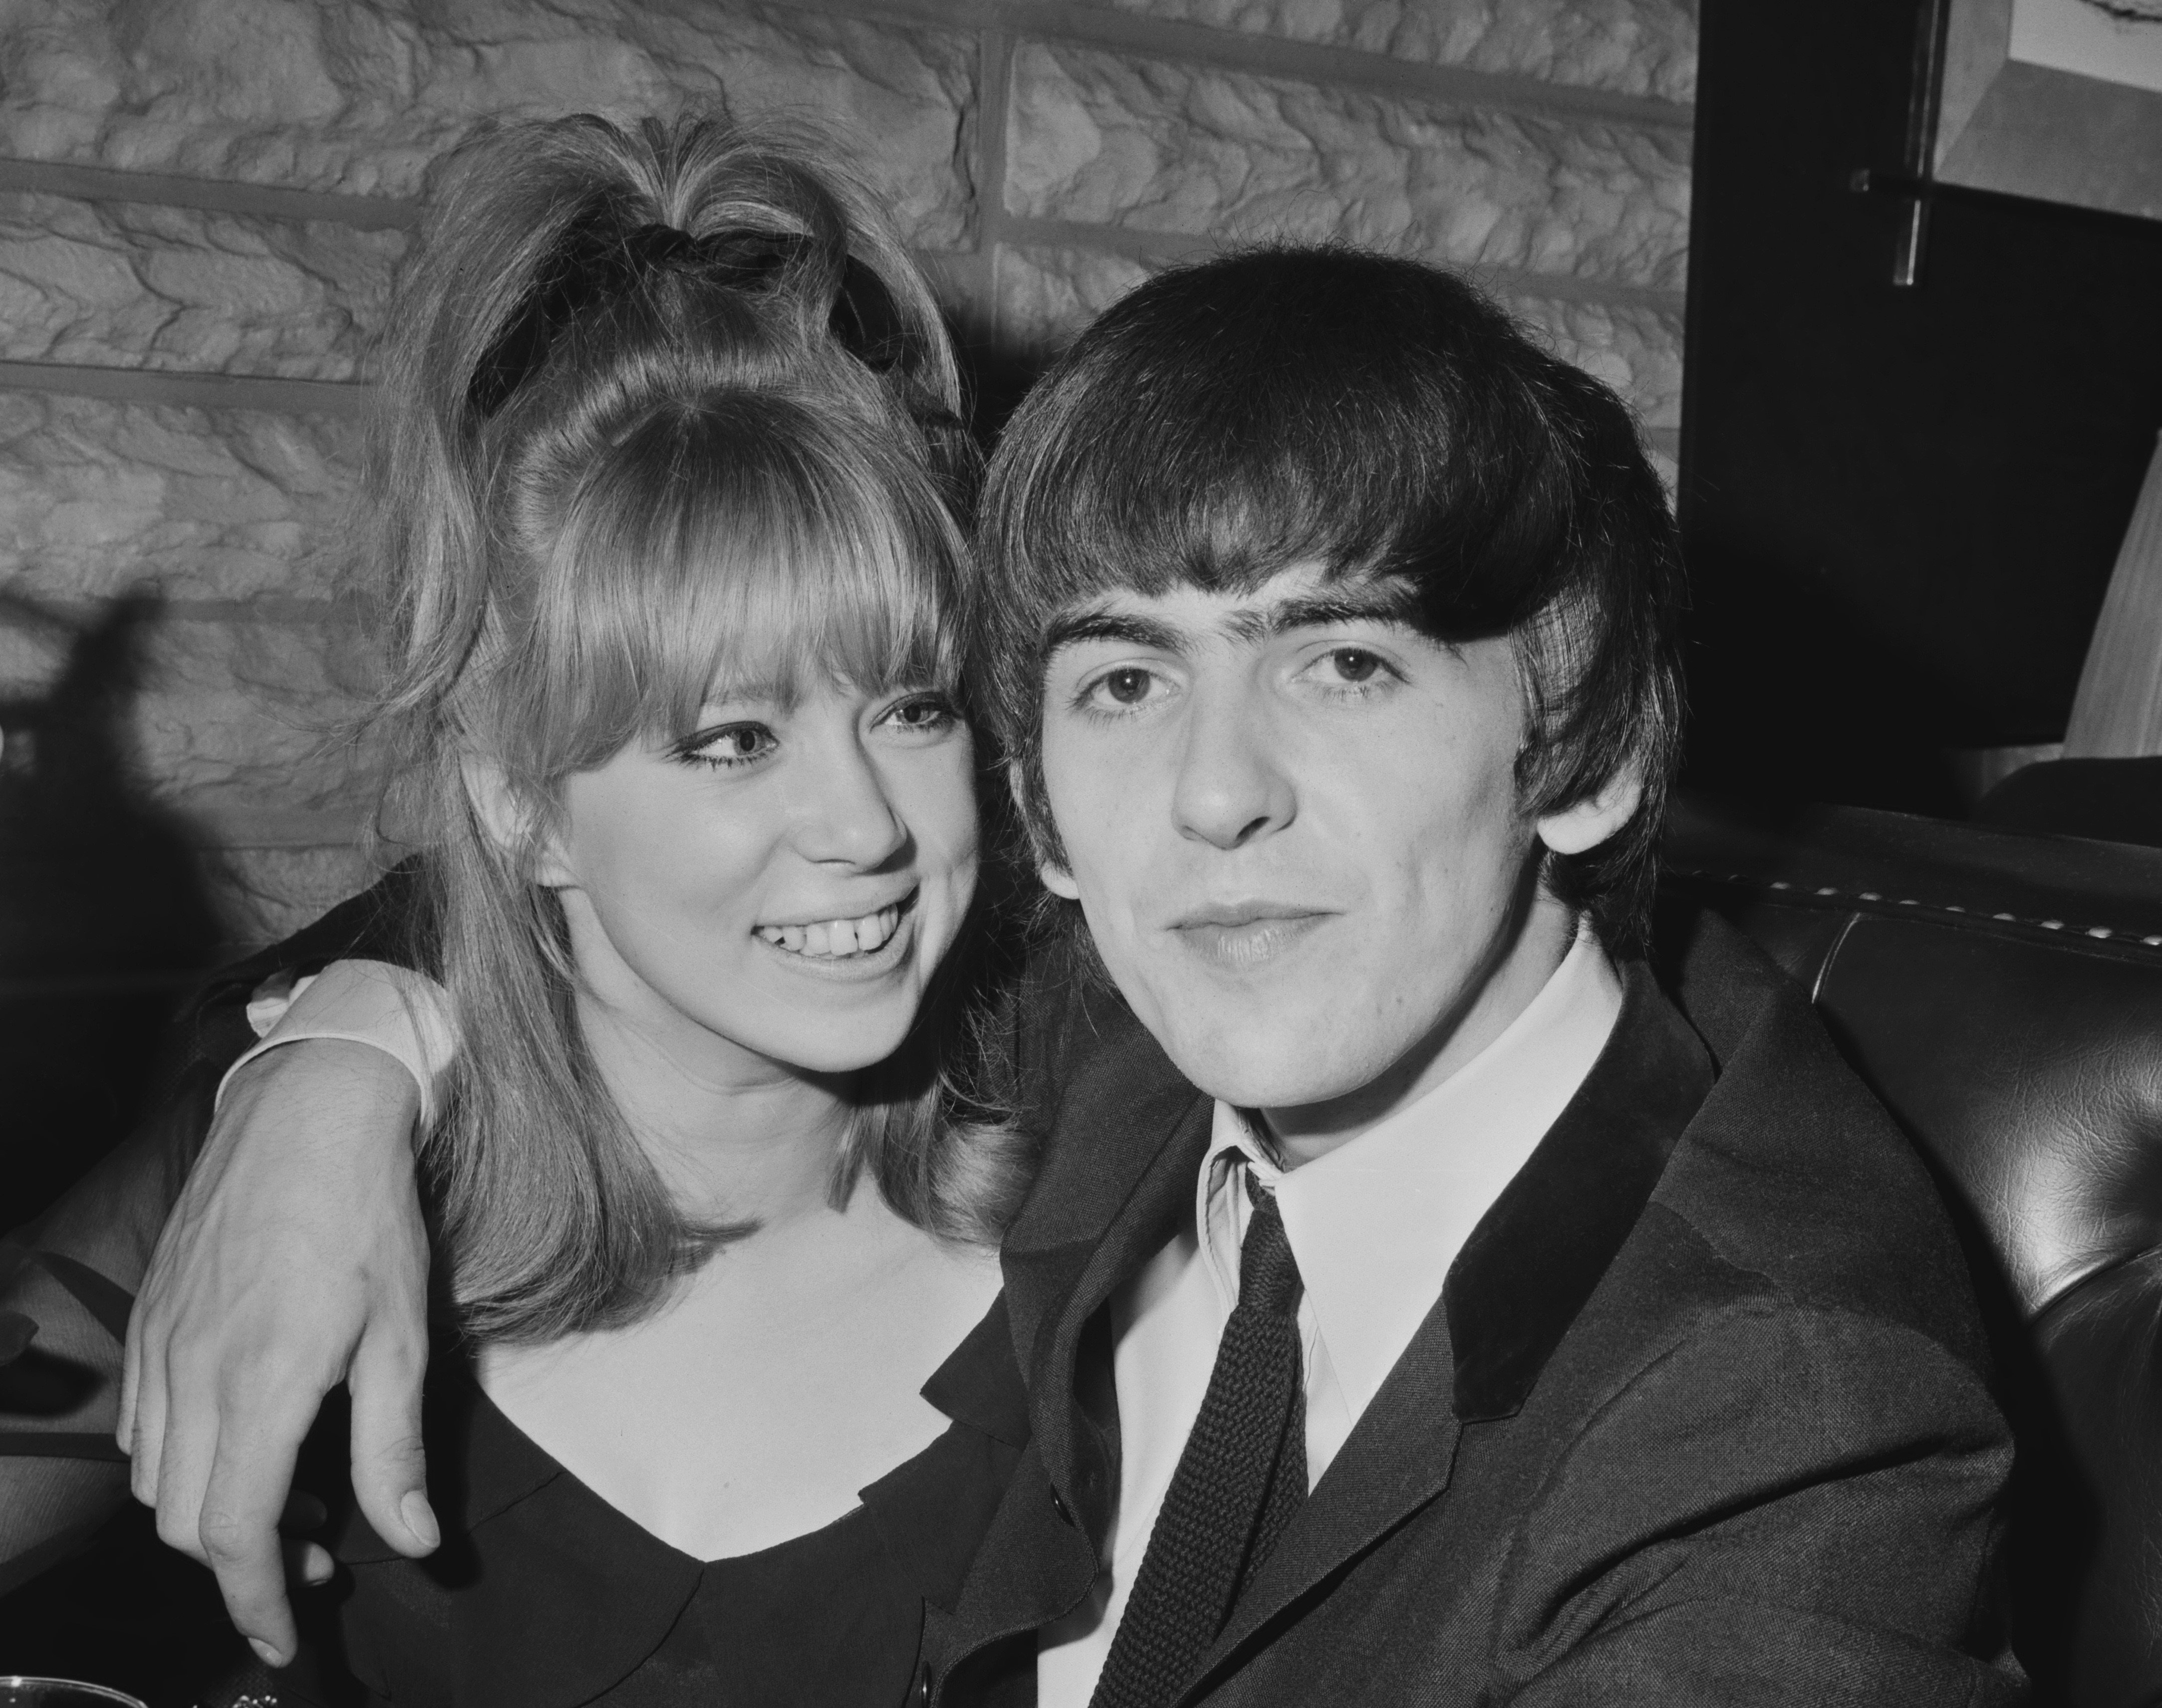 A black and white picture of George Harrison with his arm around Pattie Boyd's shoulder. 